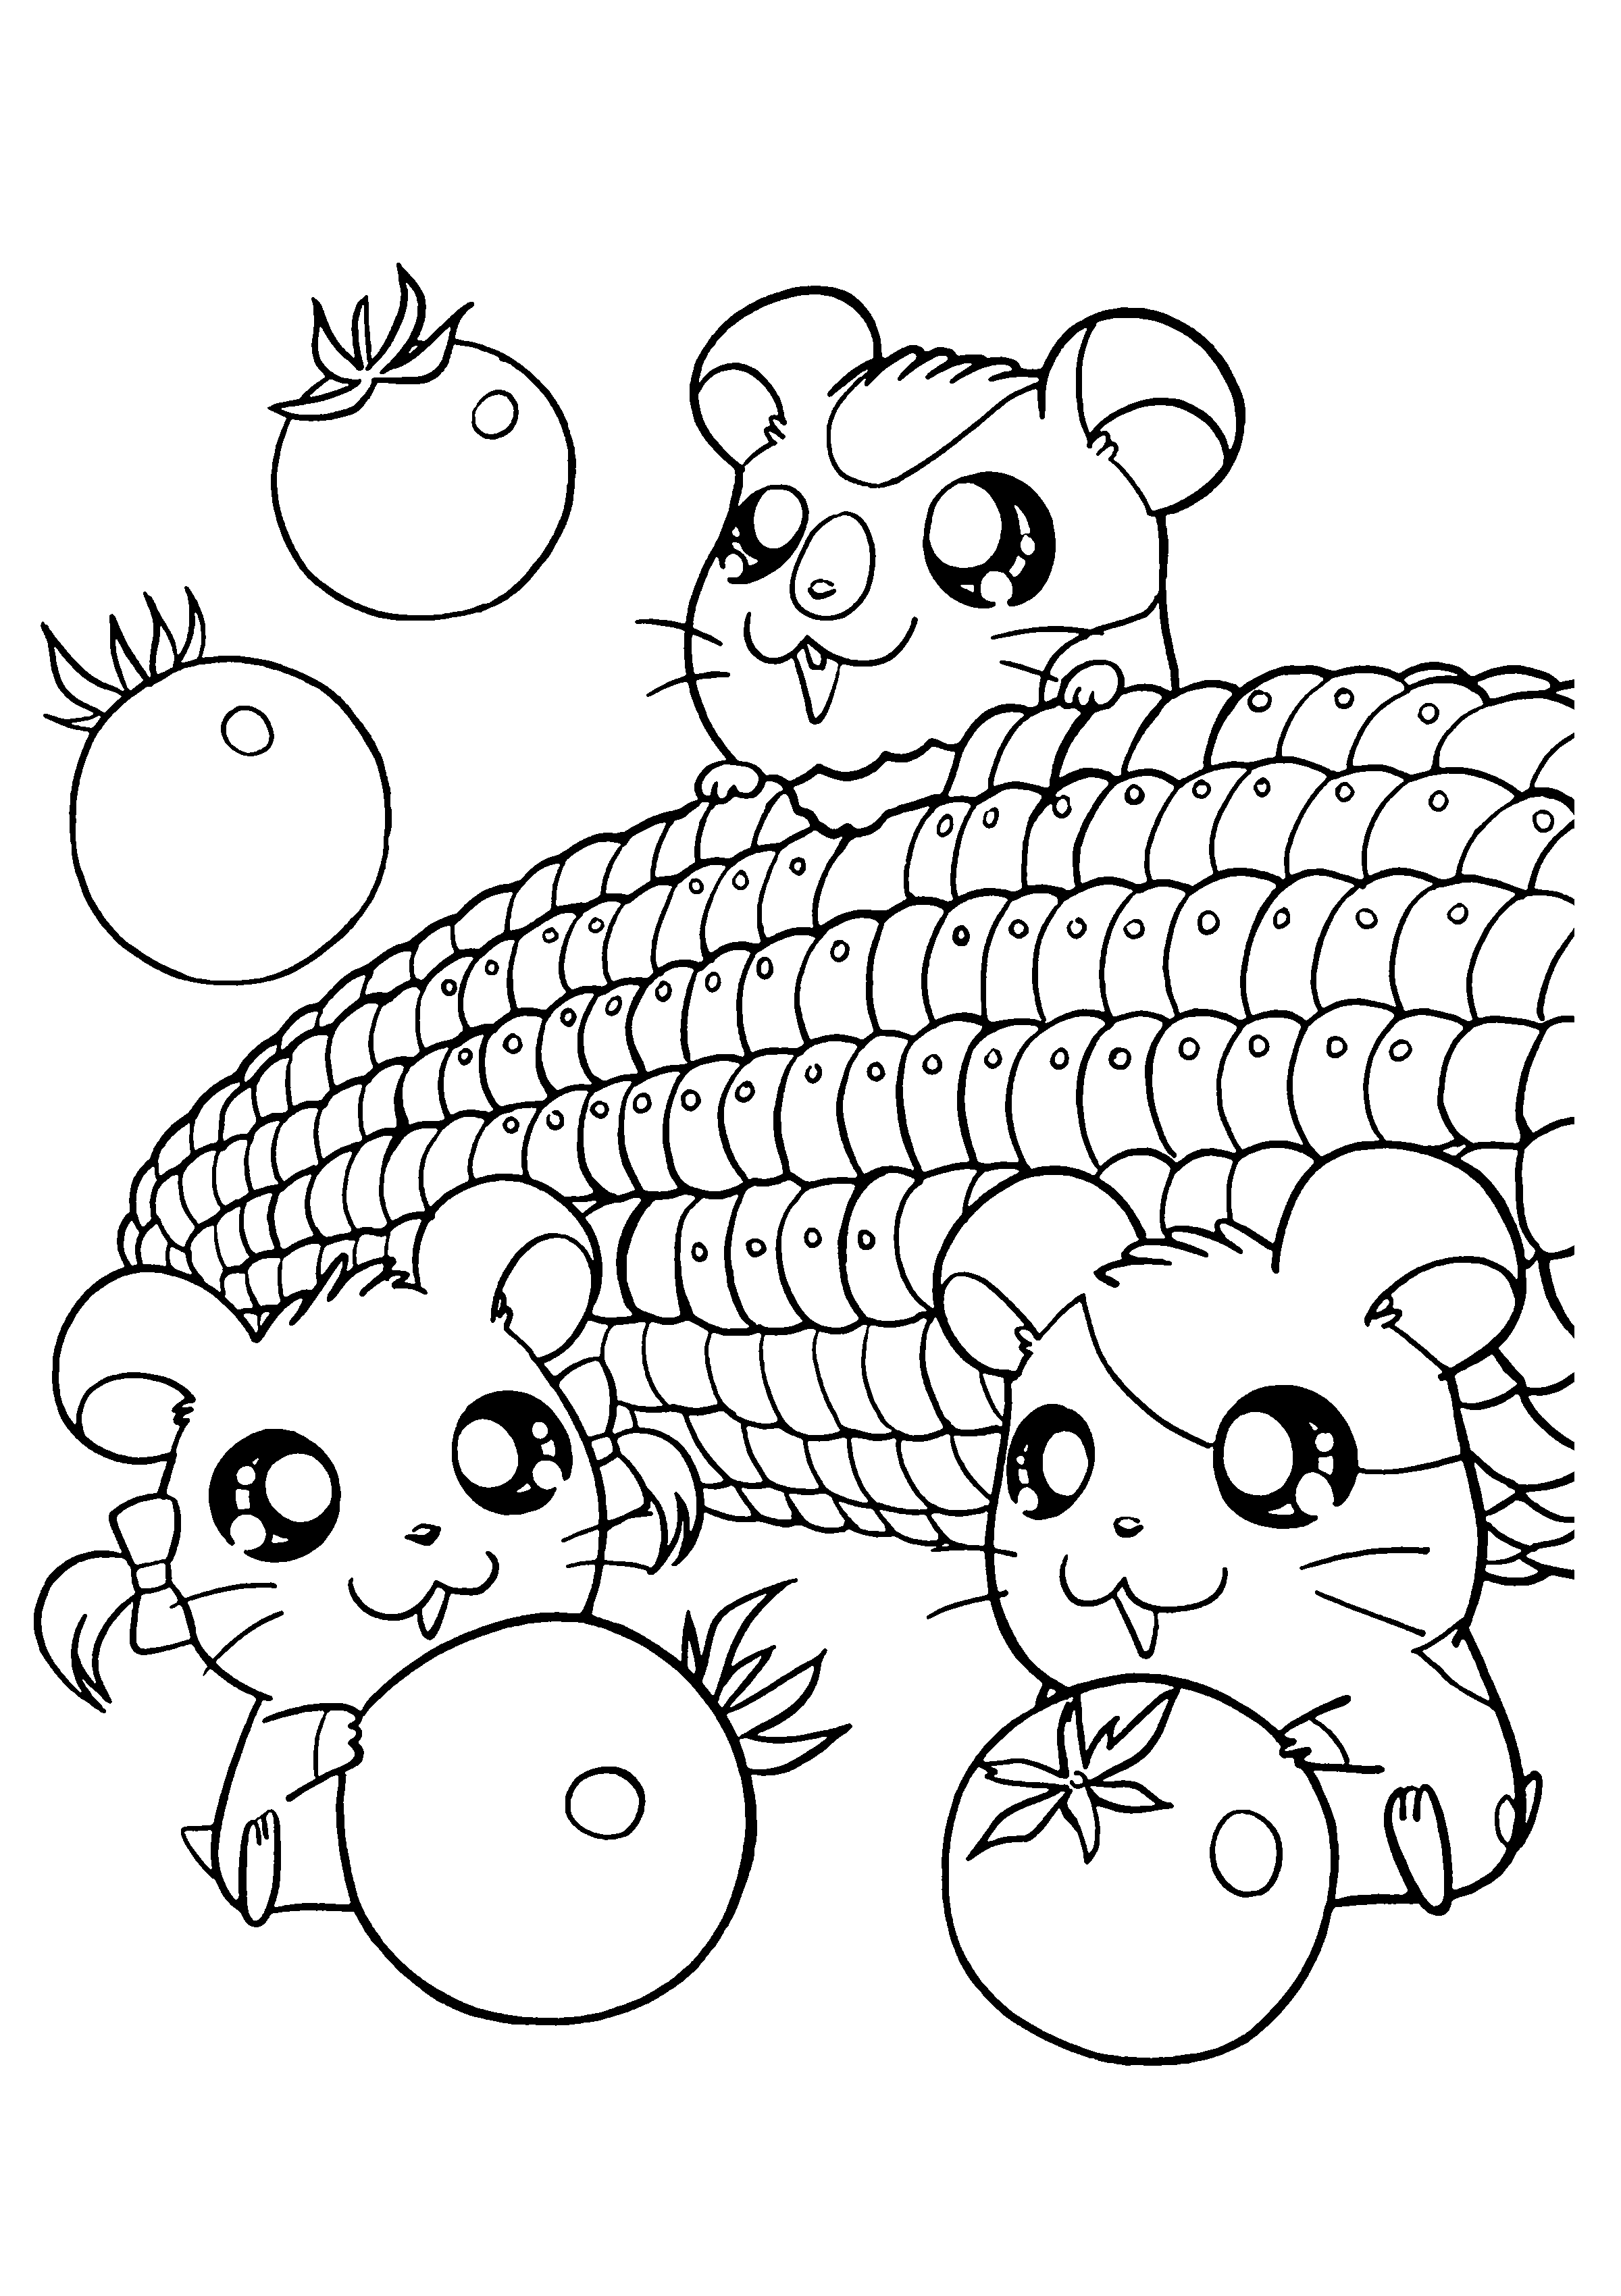 hamtaro coloring pages to download and print for free